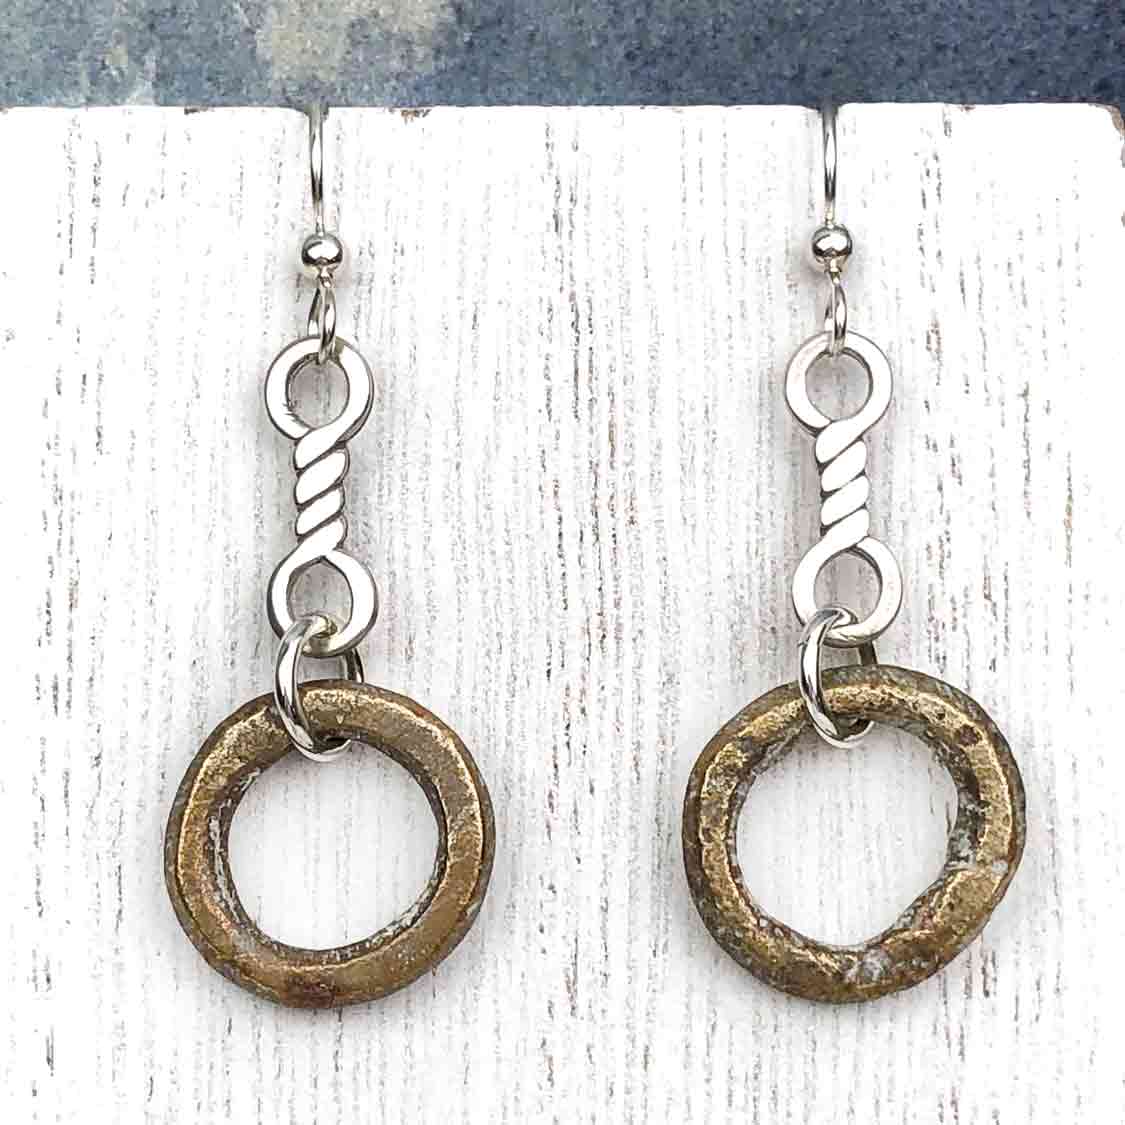 Light Thick Bronze Celtic Ring Money Earrings with Twist Charms 